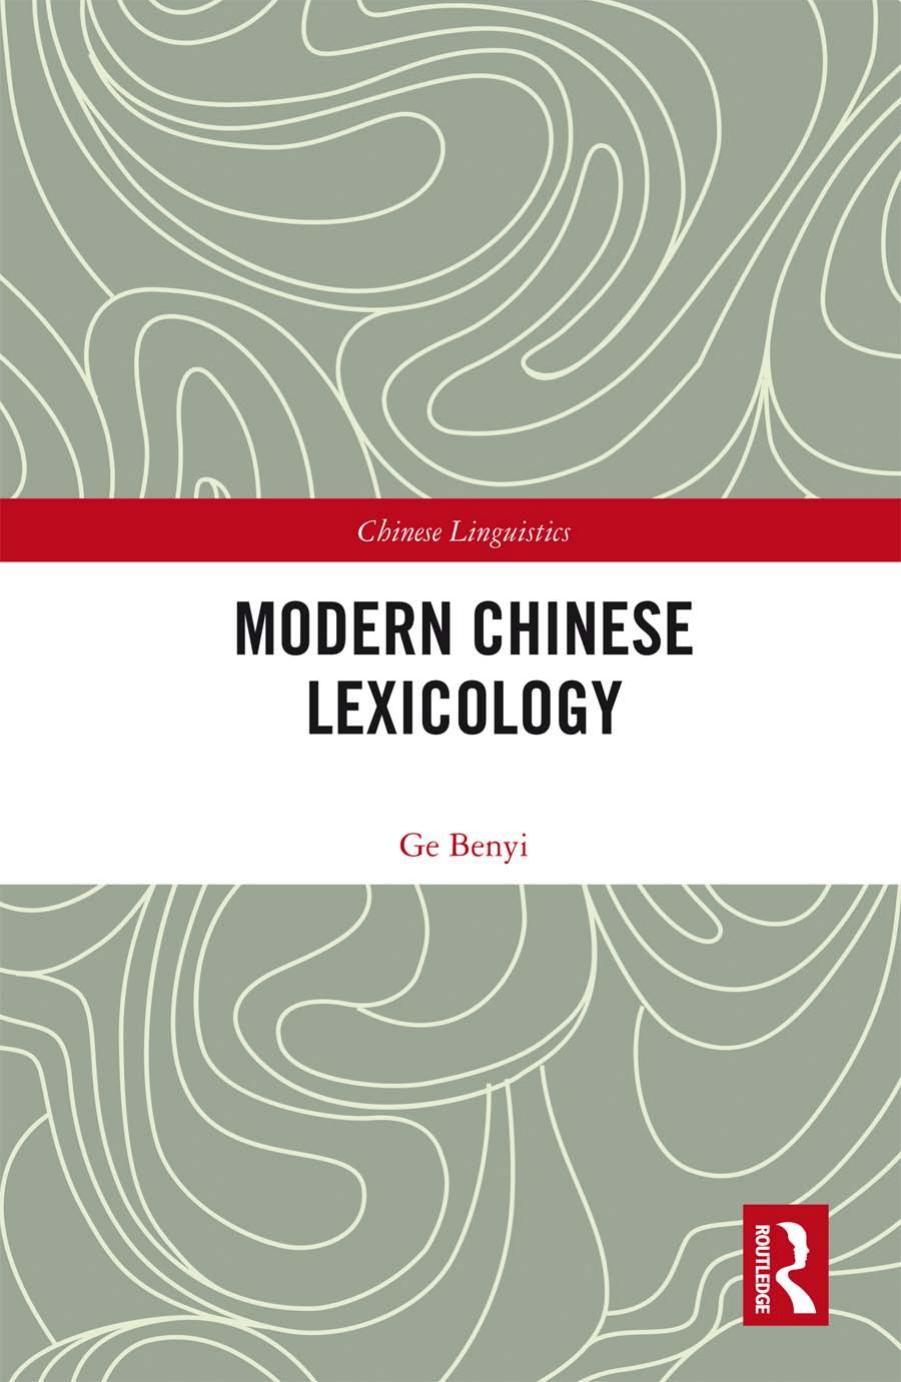 Modern Chinese Lexicology by Ge Benyi